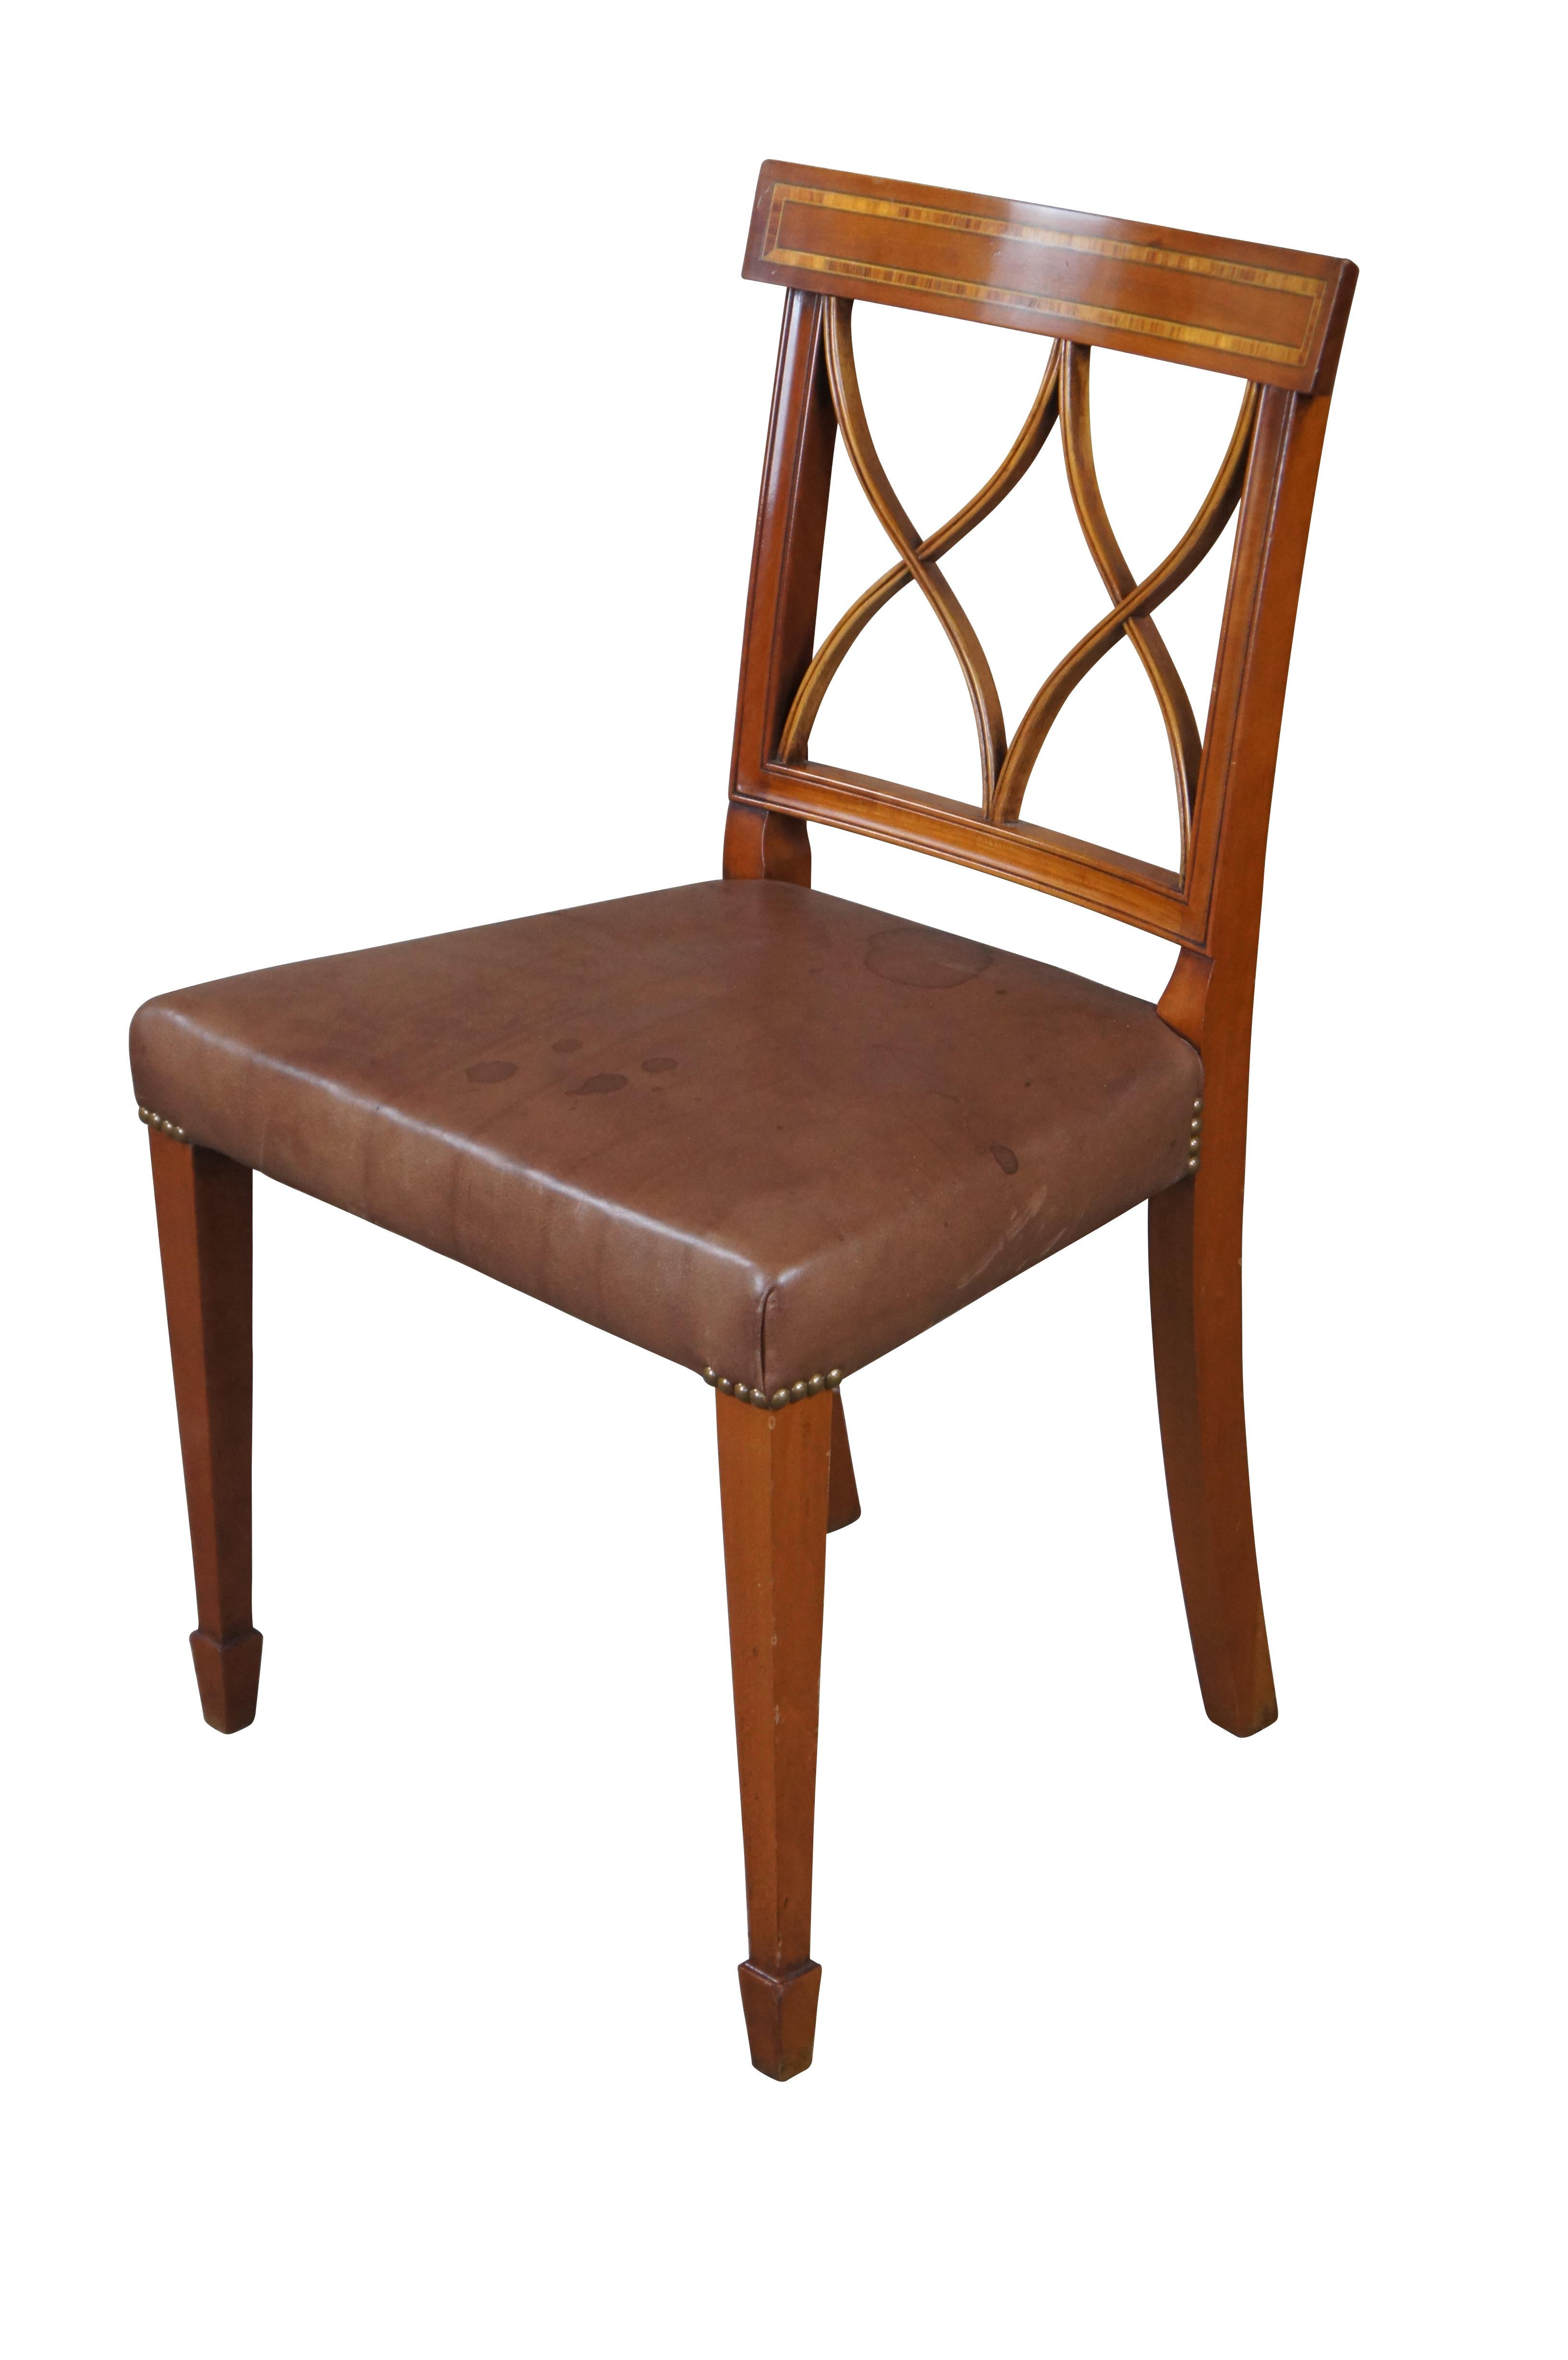 Arthur Brett English Sheraton Style Mahogany Inlaid Leather Dining Side Chair, #2013 2313.  Features a curved crest rail with crossbanding over a pierced double X inlaid back leading to a brown leather seat.  Leather is accented by brass nailhead